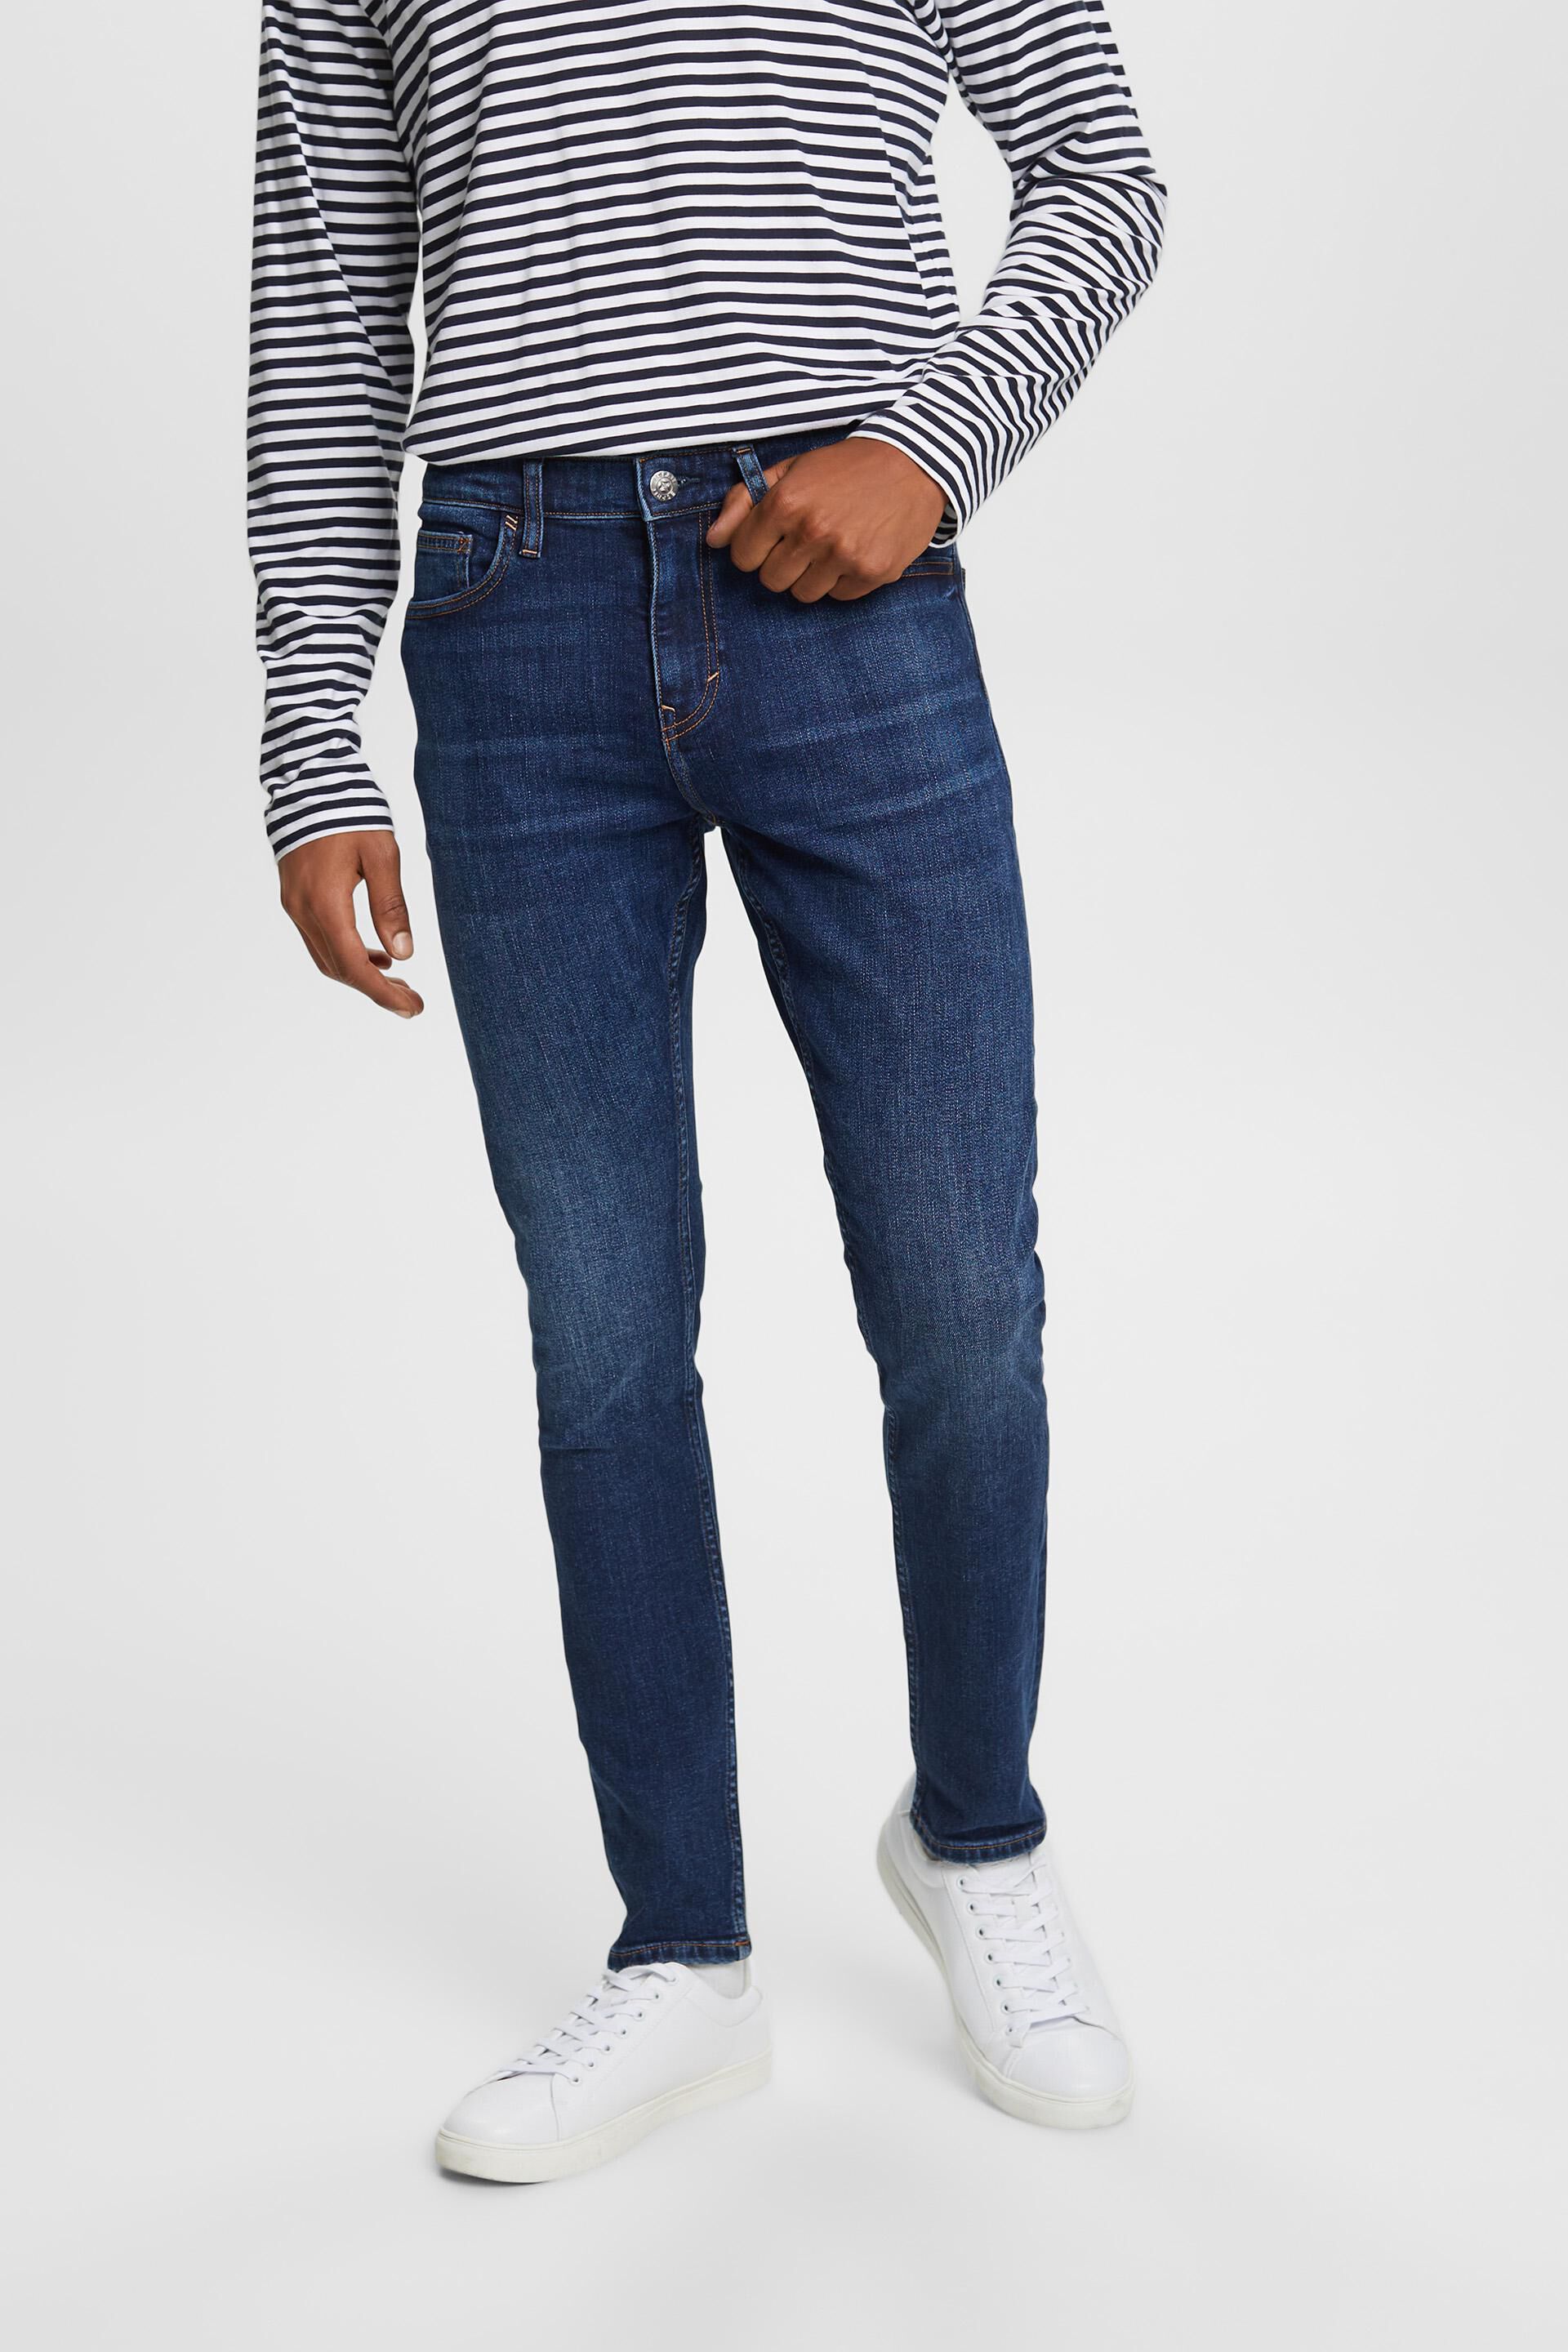 Esprit stretch Skinny recycled cotton jeans,